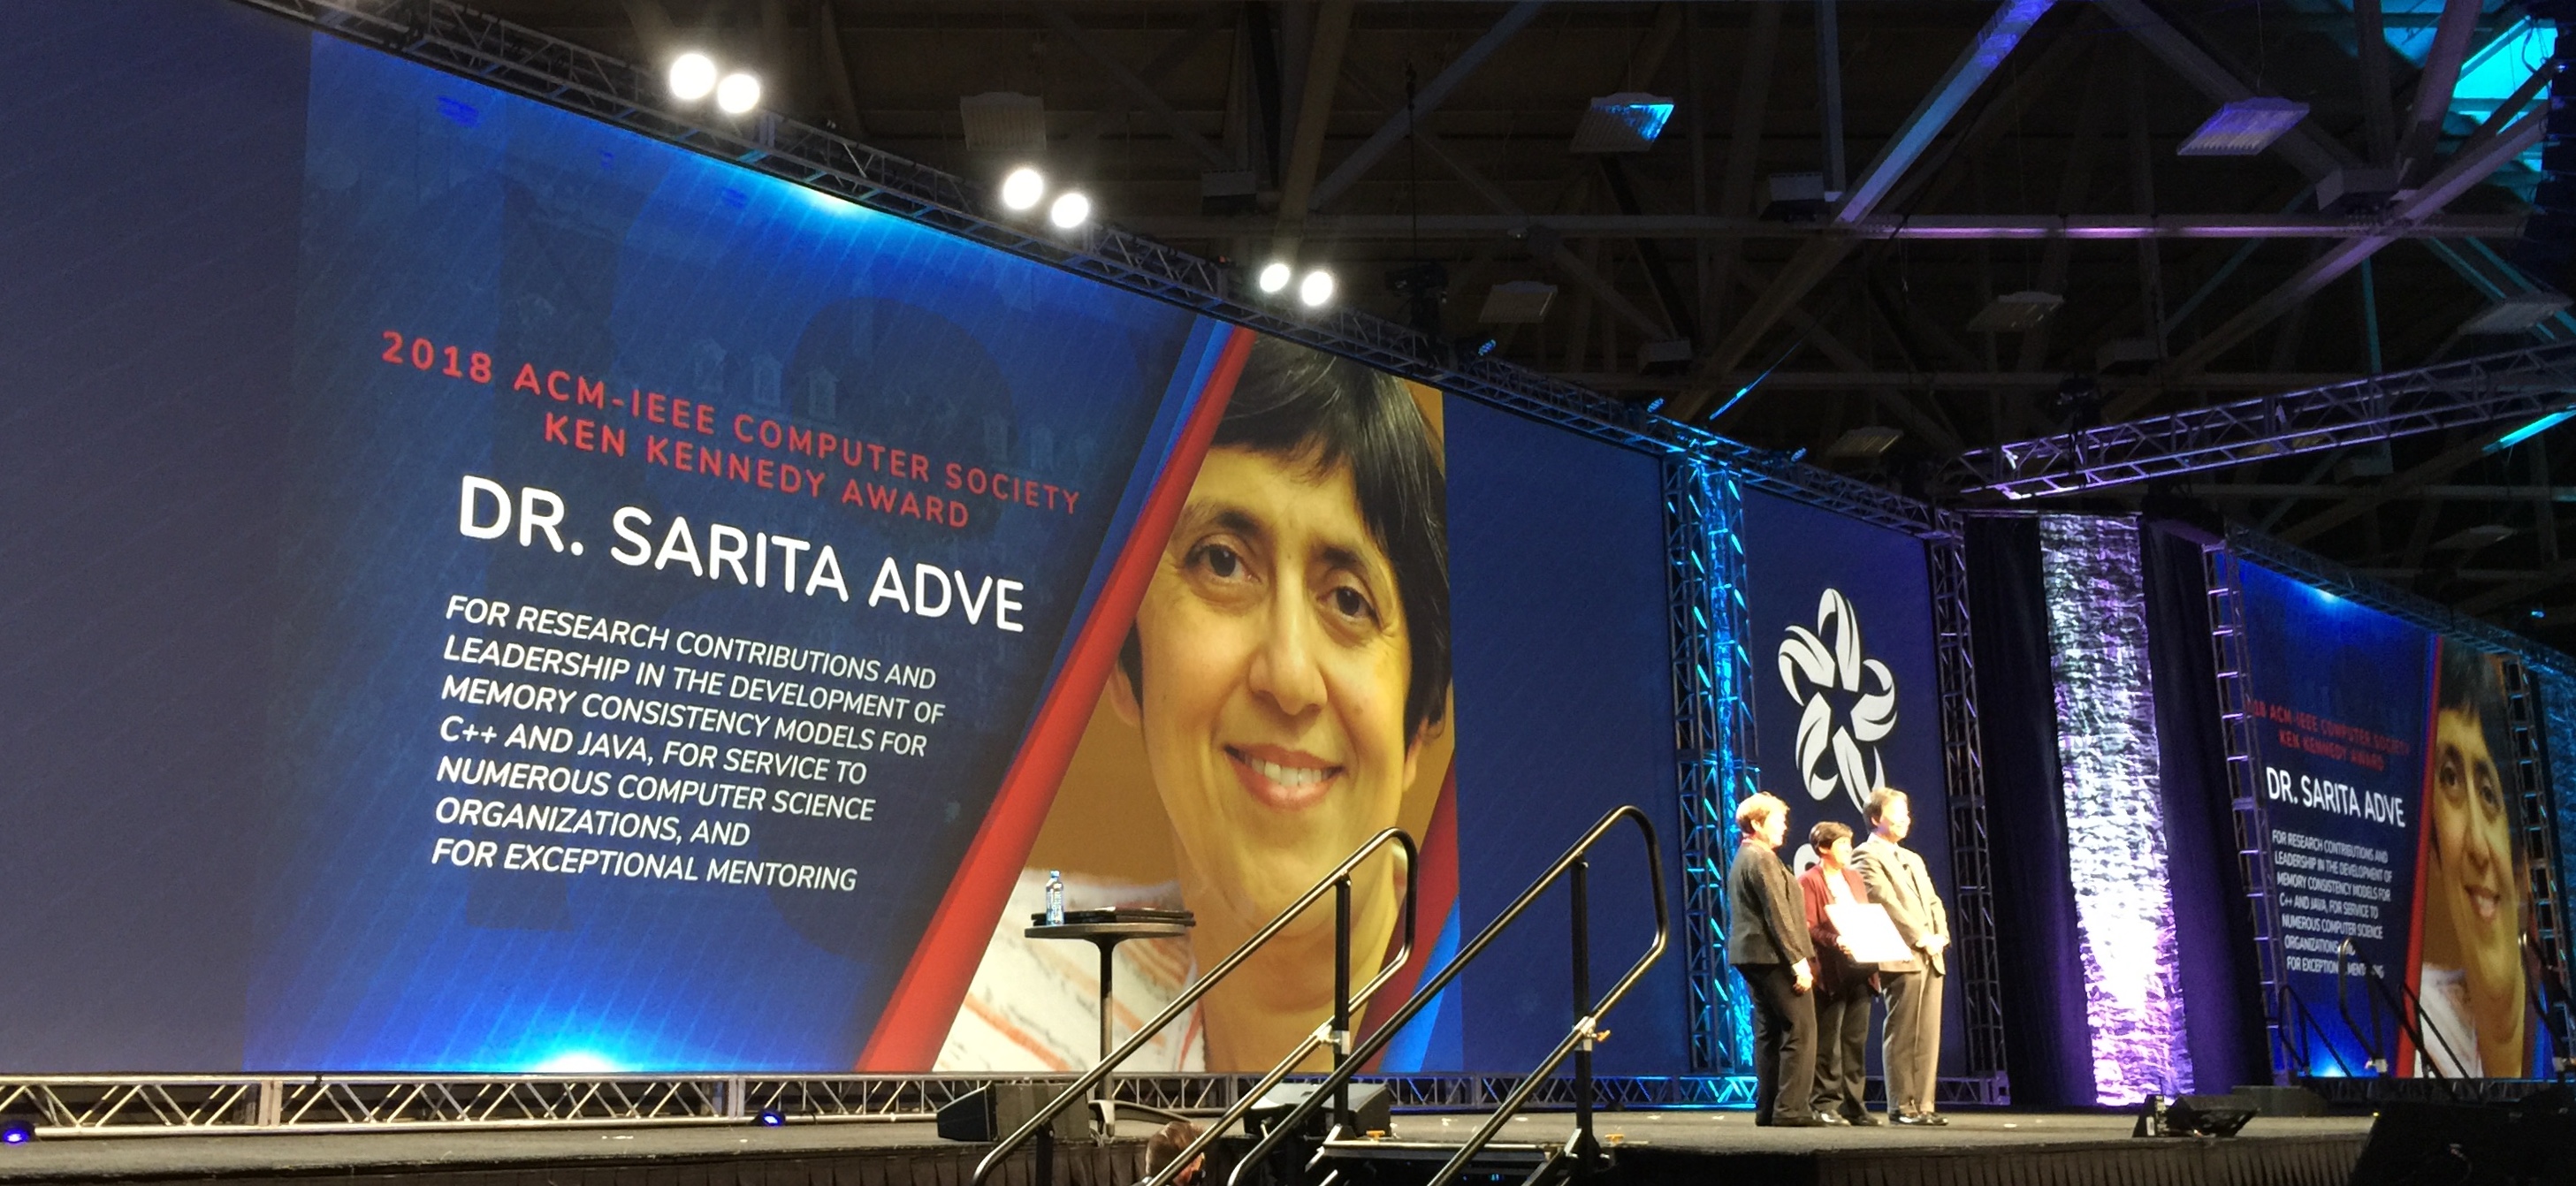 Sarita Adve, the Richard T. Cheng Professor of Computer Science at the University of Illinois, formally receives the 2018 ACM/IEEE Computer Society Ken Kennedy Award.